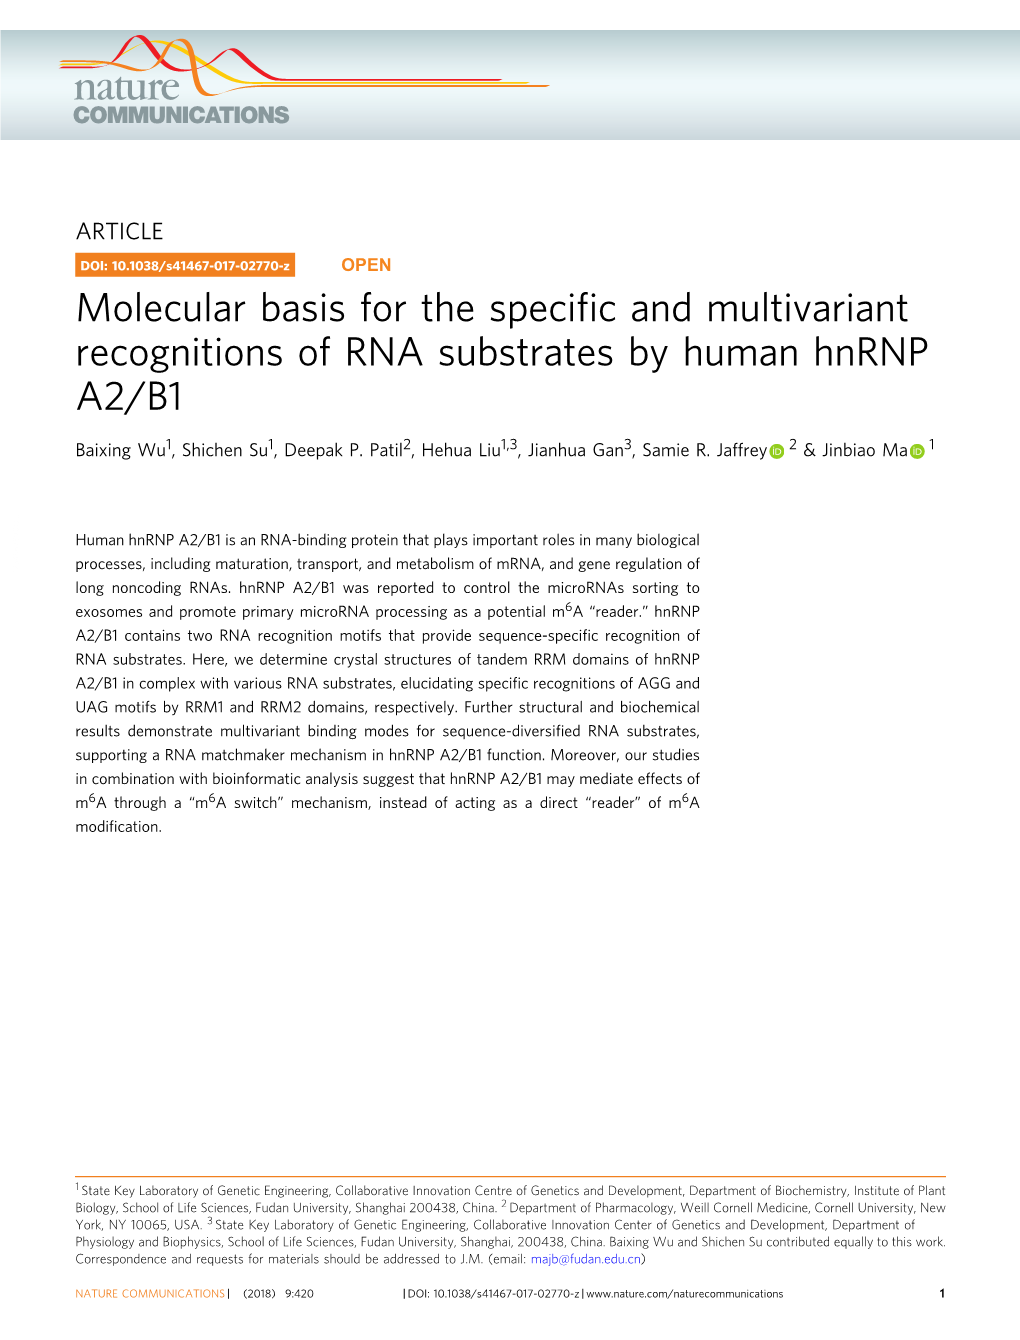 Molecular Basis for the Specific and Multivariant Recognitions of RNA